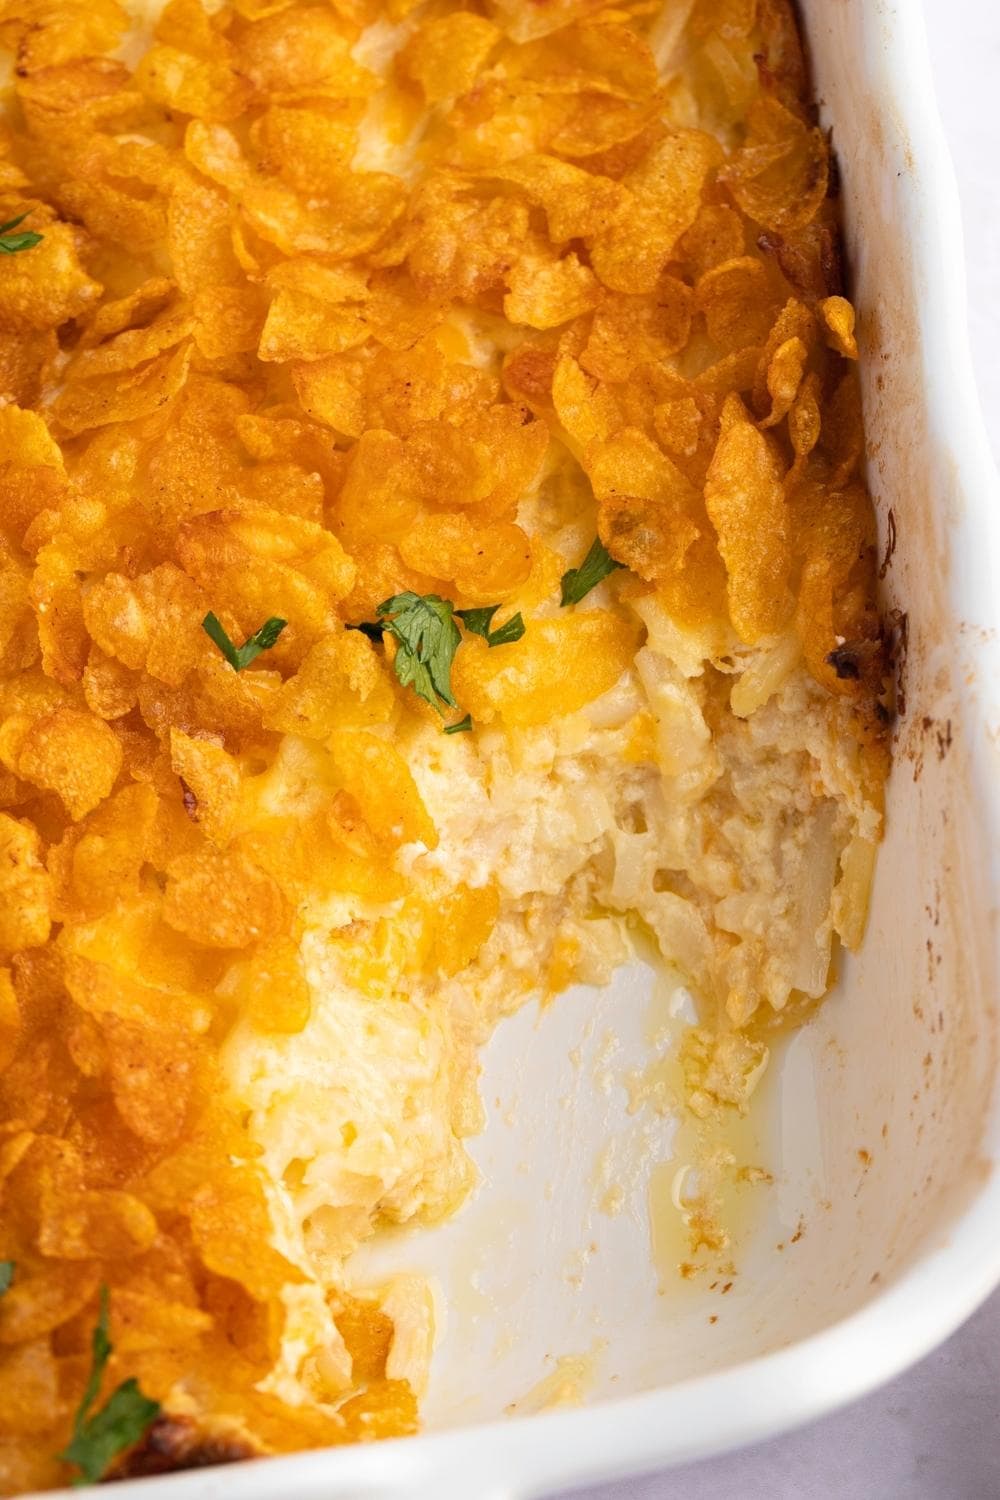 Potatoes casserole with cheesy, creamy and buttery filling on a baking dish.